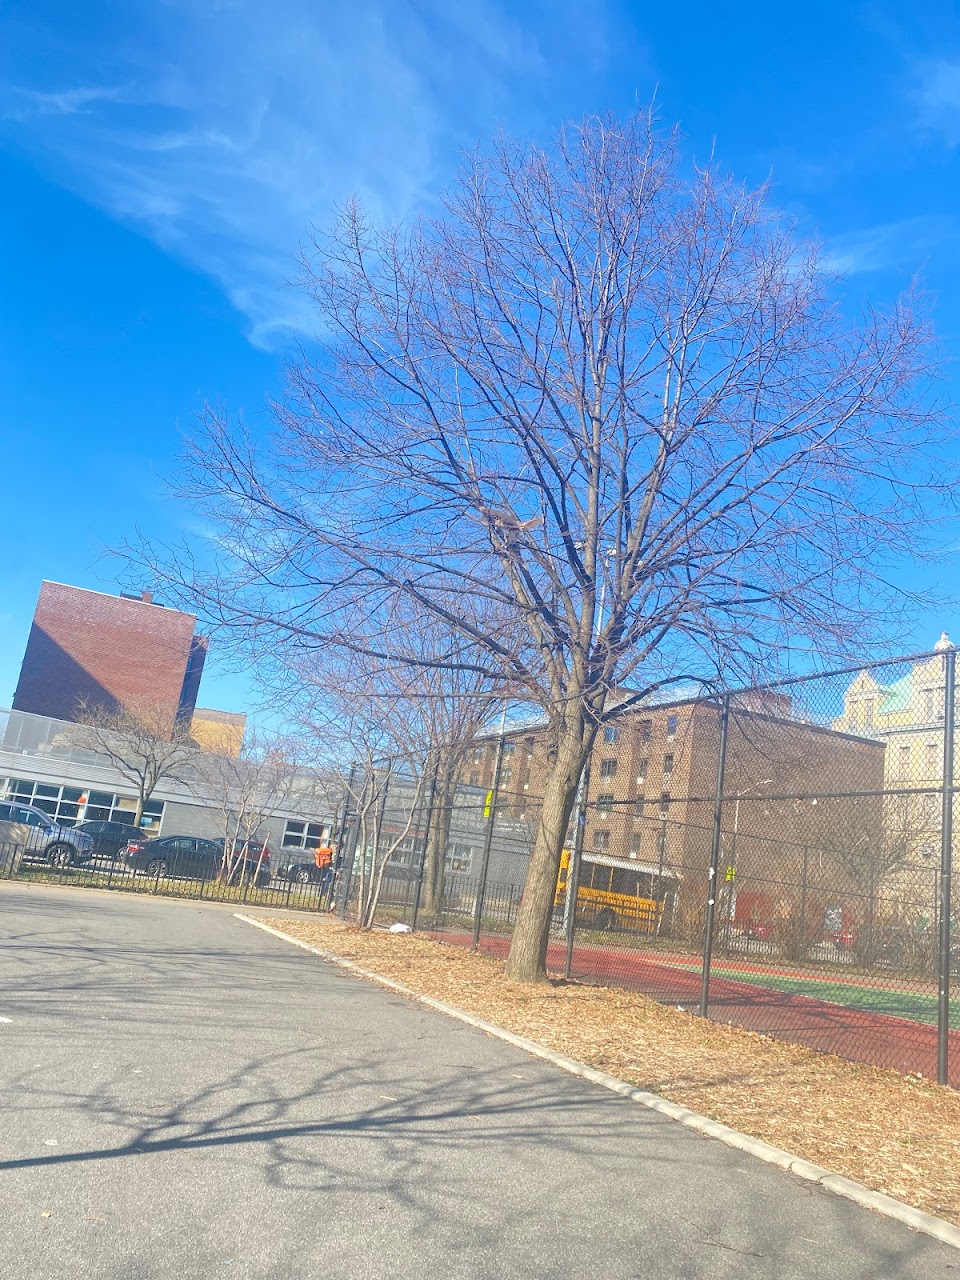 Photo of ST MARY'S PARK. Affordable housing located at 550 CAULDWELL AVE BRONX, NY 10455